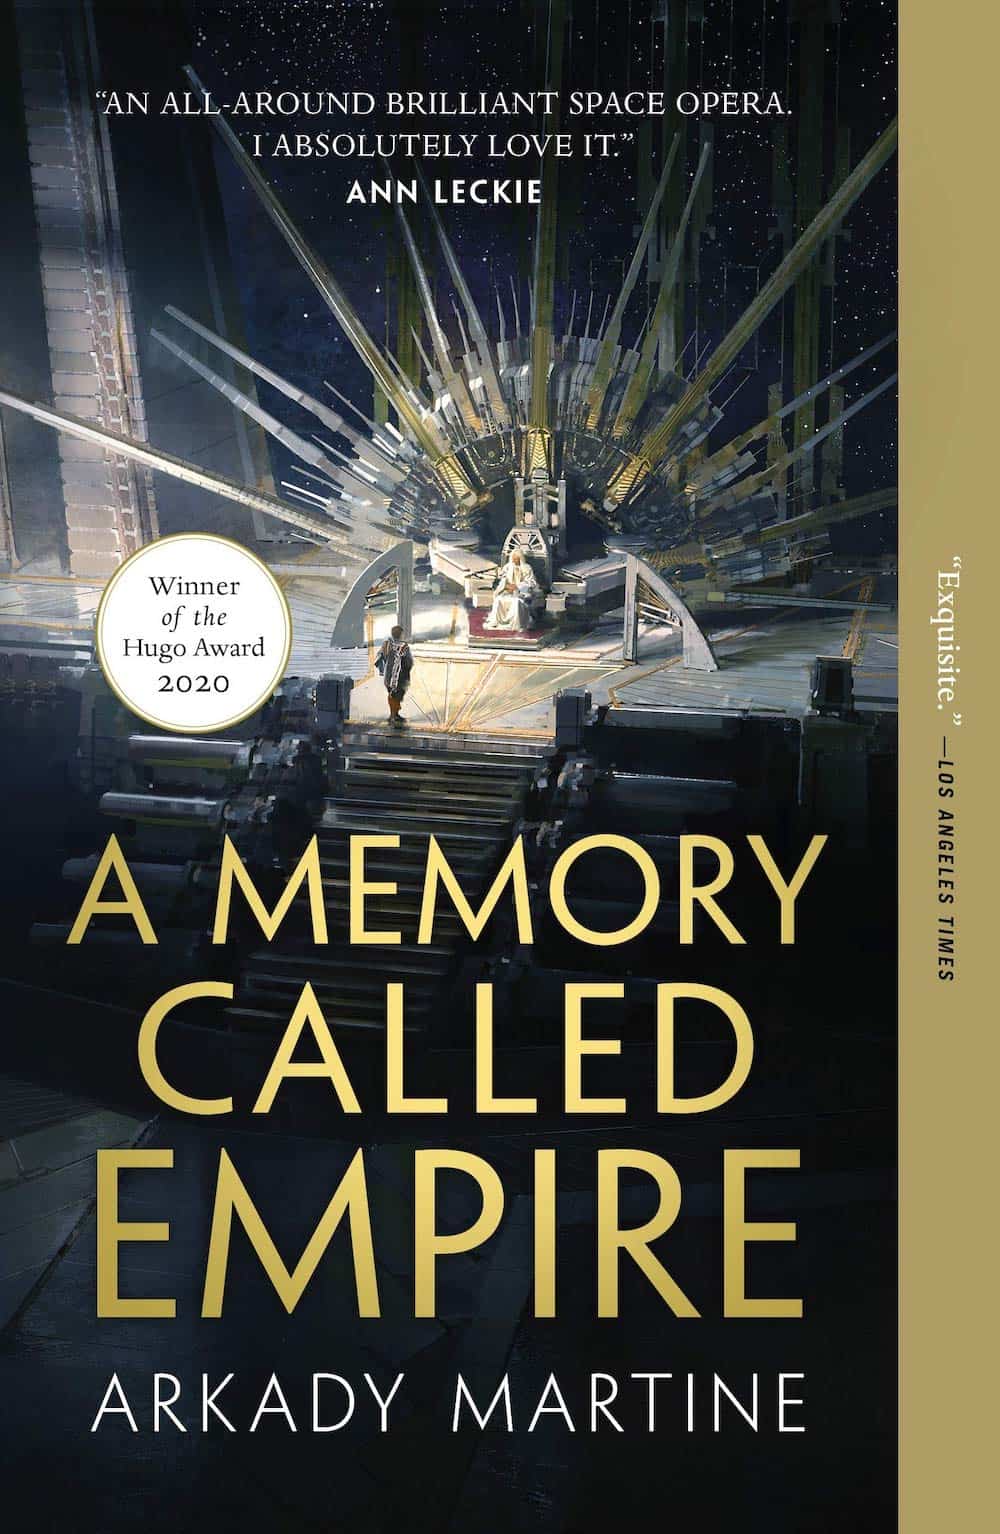 The cover of A Memory Called Empire